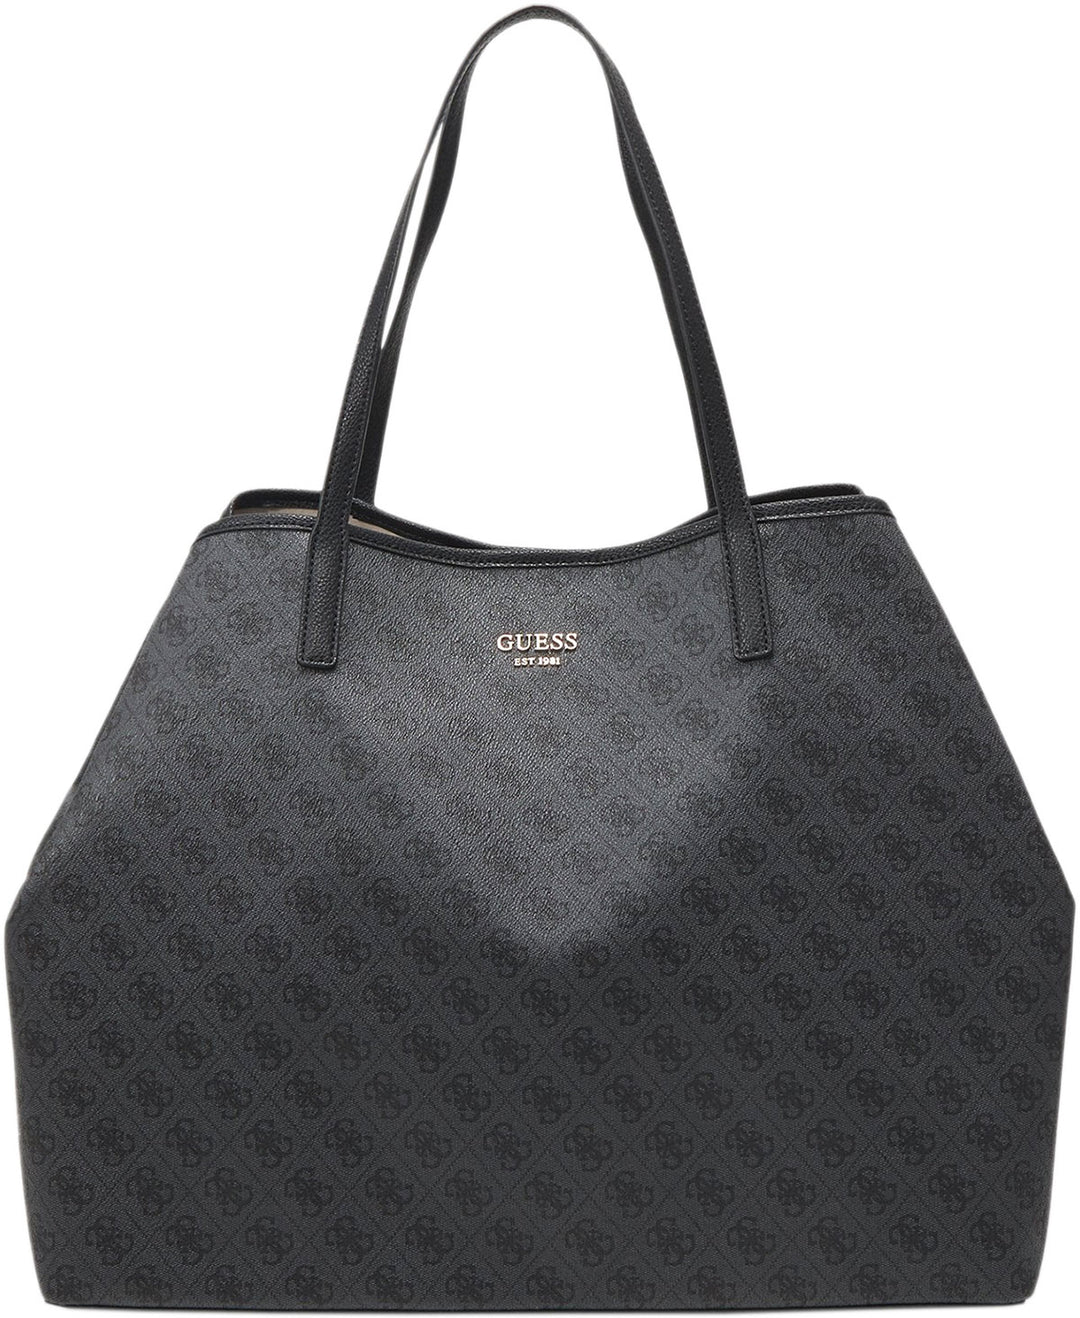 Guess Vikky Women's Synthetic Tote Bag in Coal Size One Size 